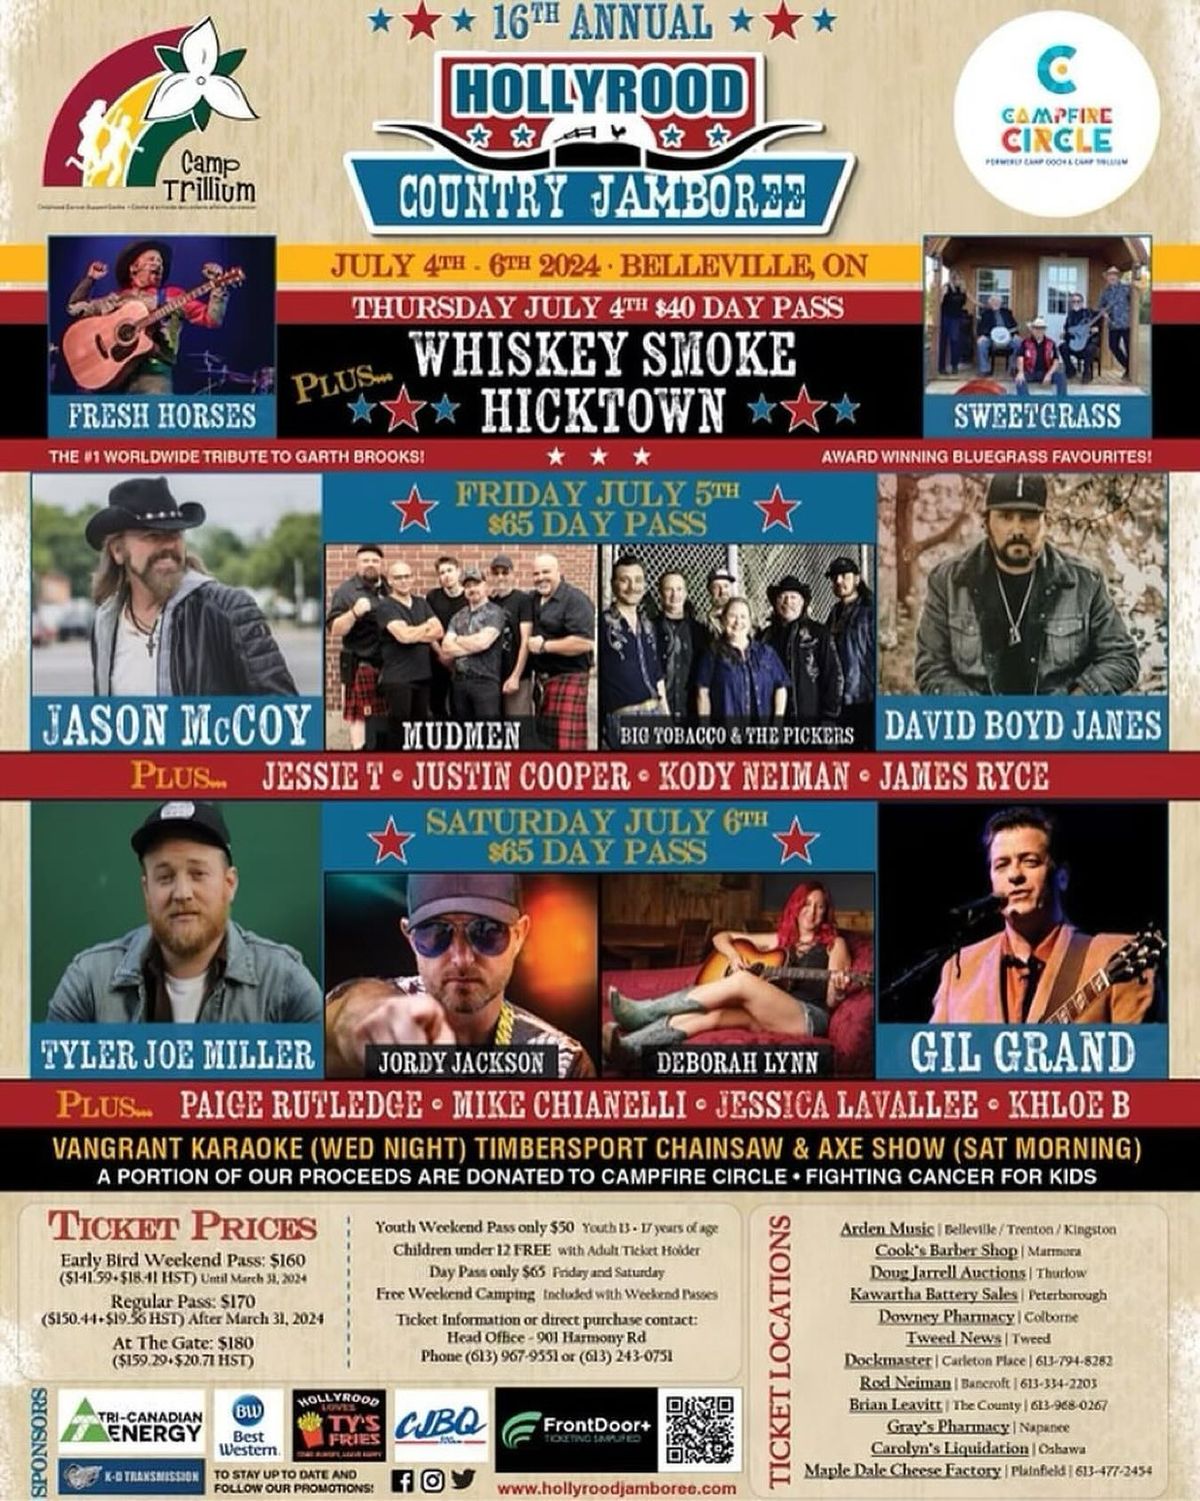 16th Annual Hollyrood Country Jamboree